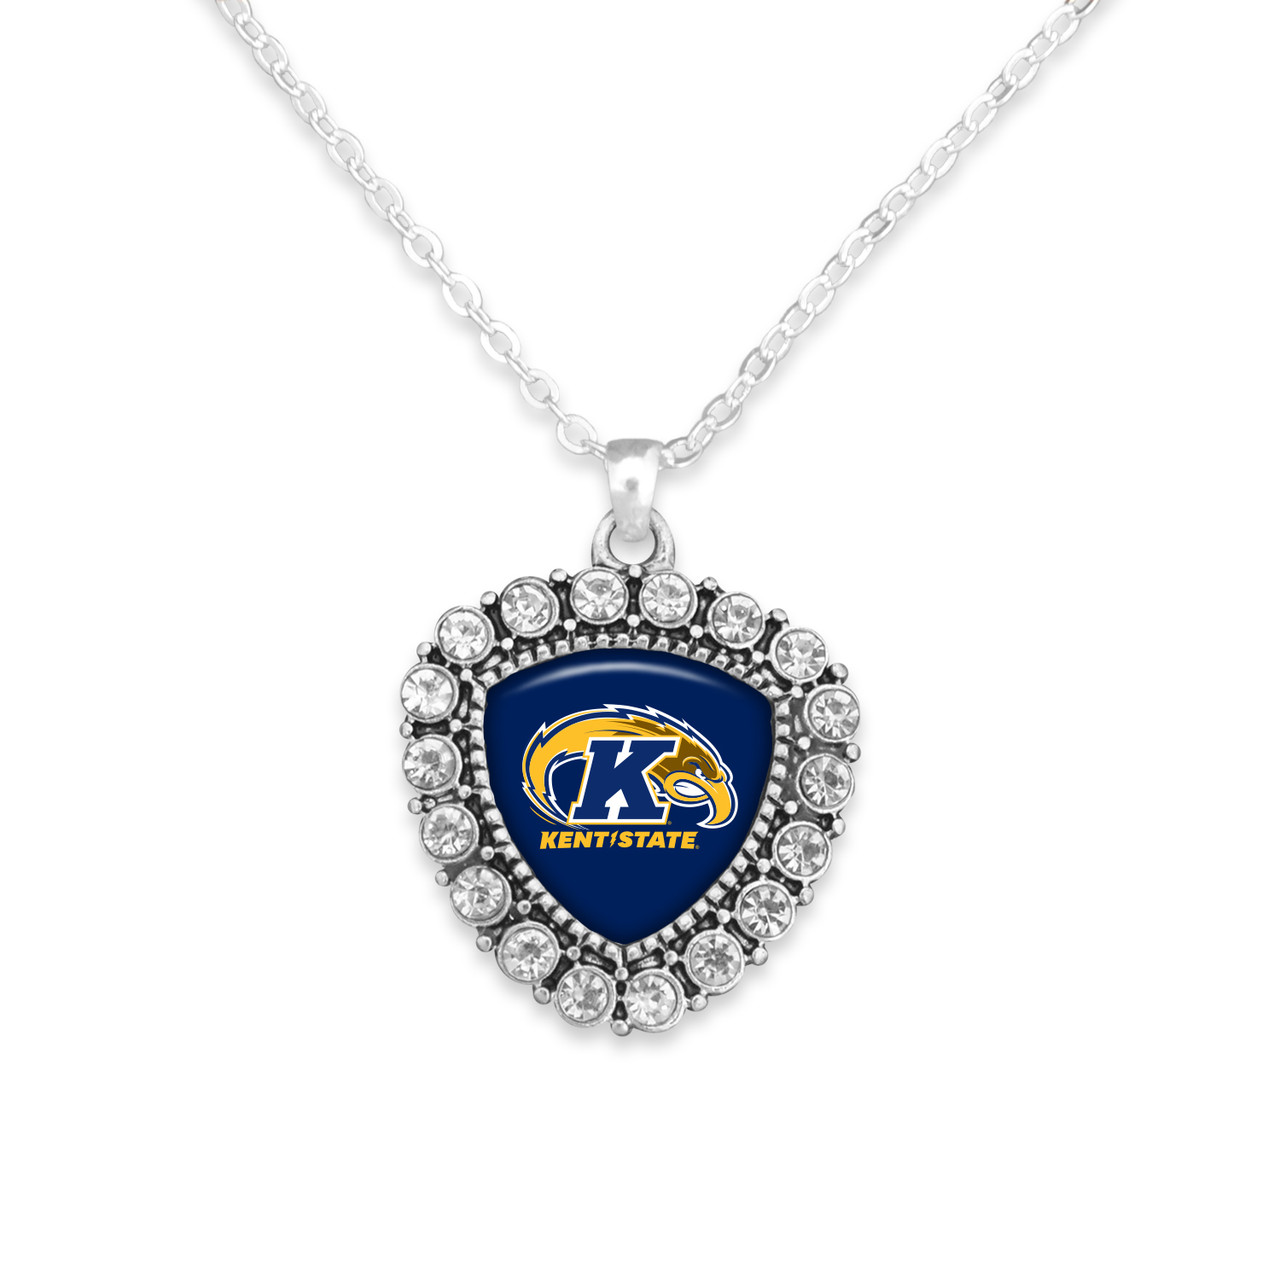 Kent State Golden Flashes Necklace- Brooke